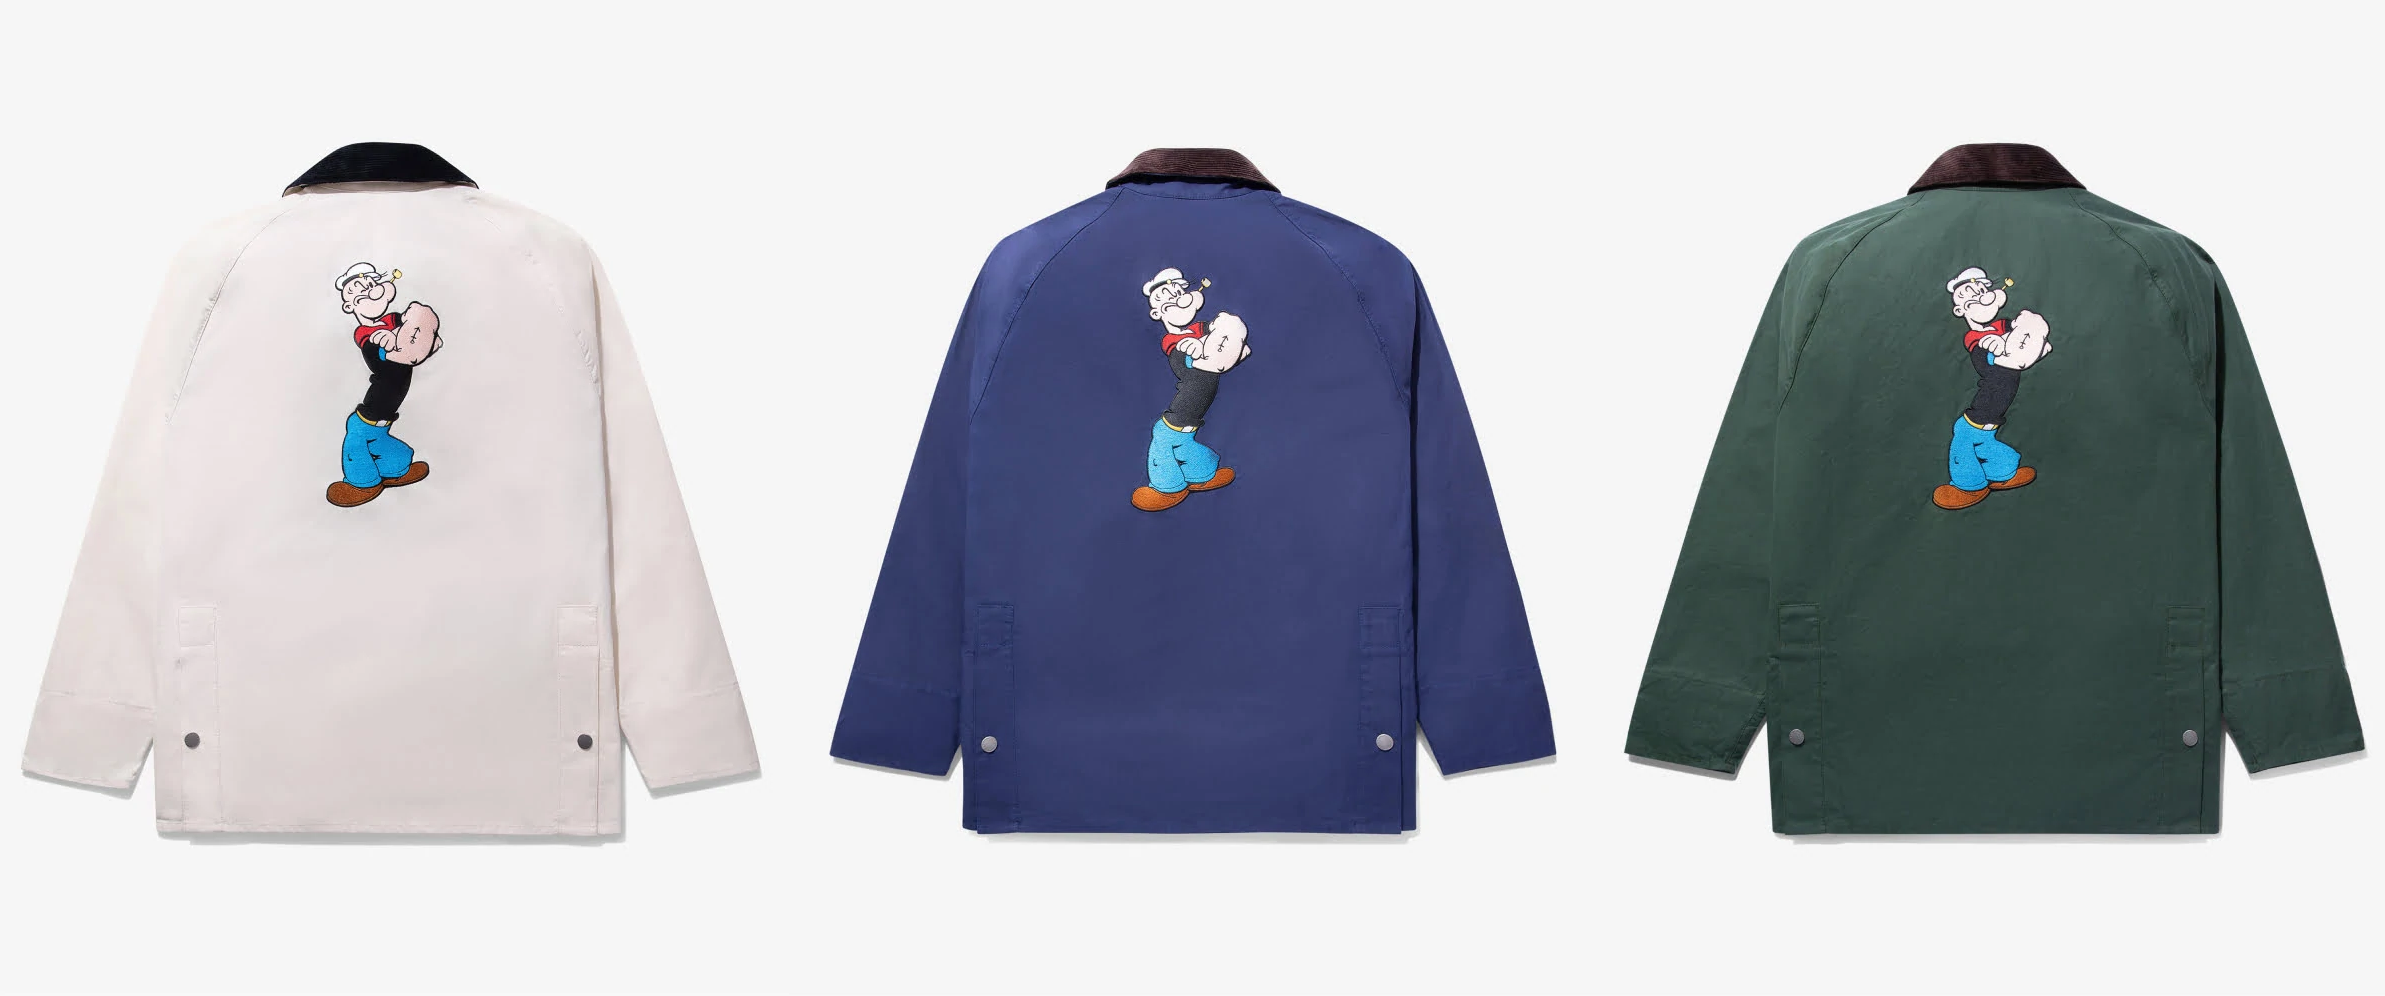 Best Style Releases This Week: The North Face x Supreme, Kith